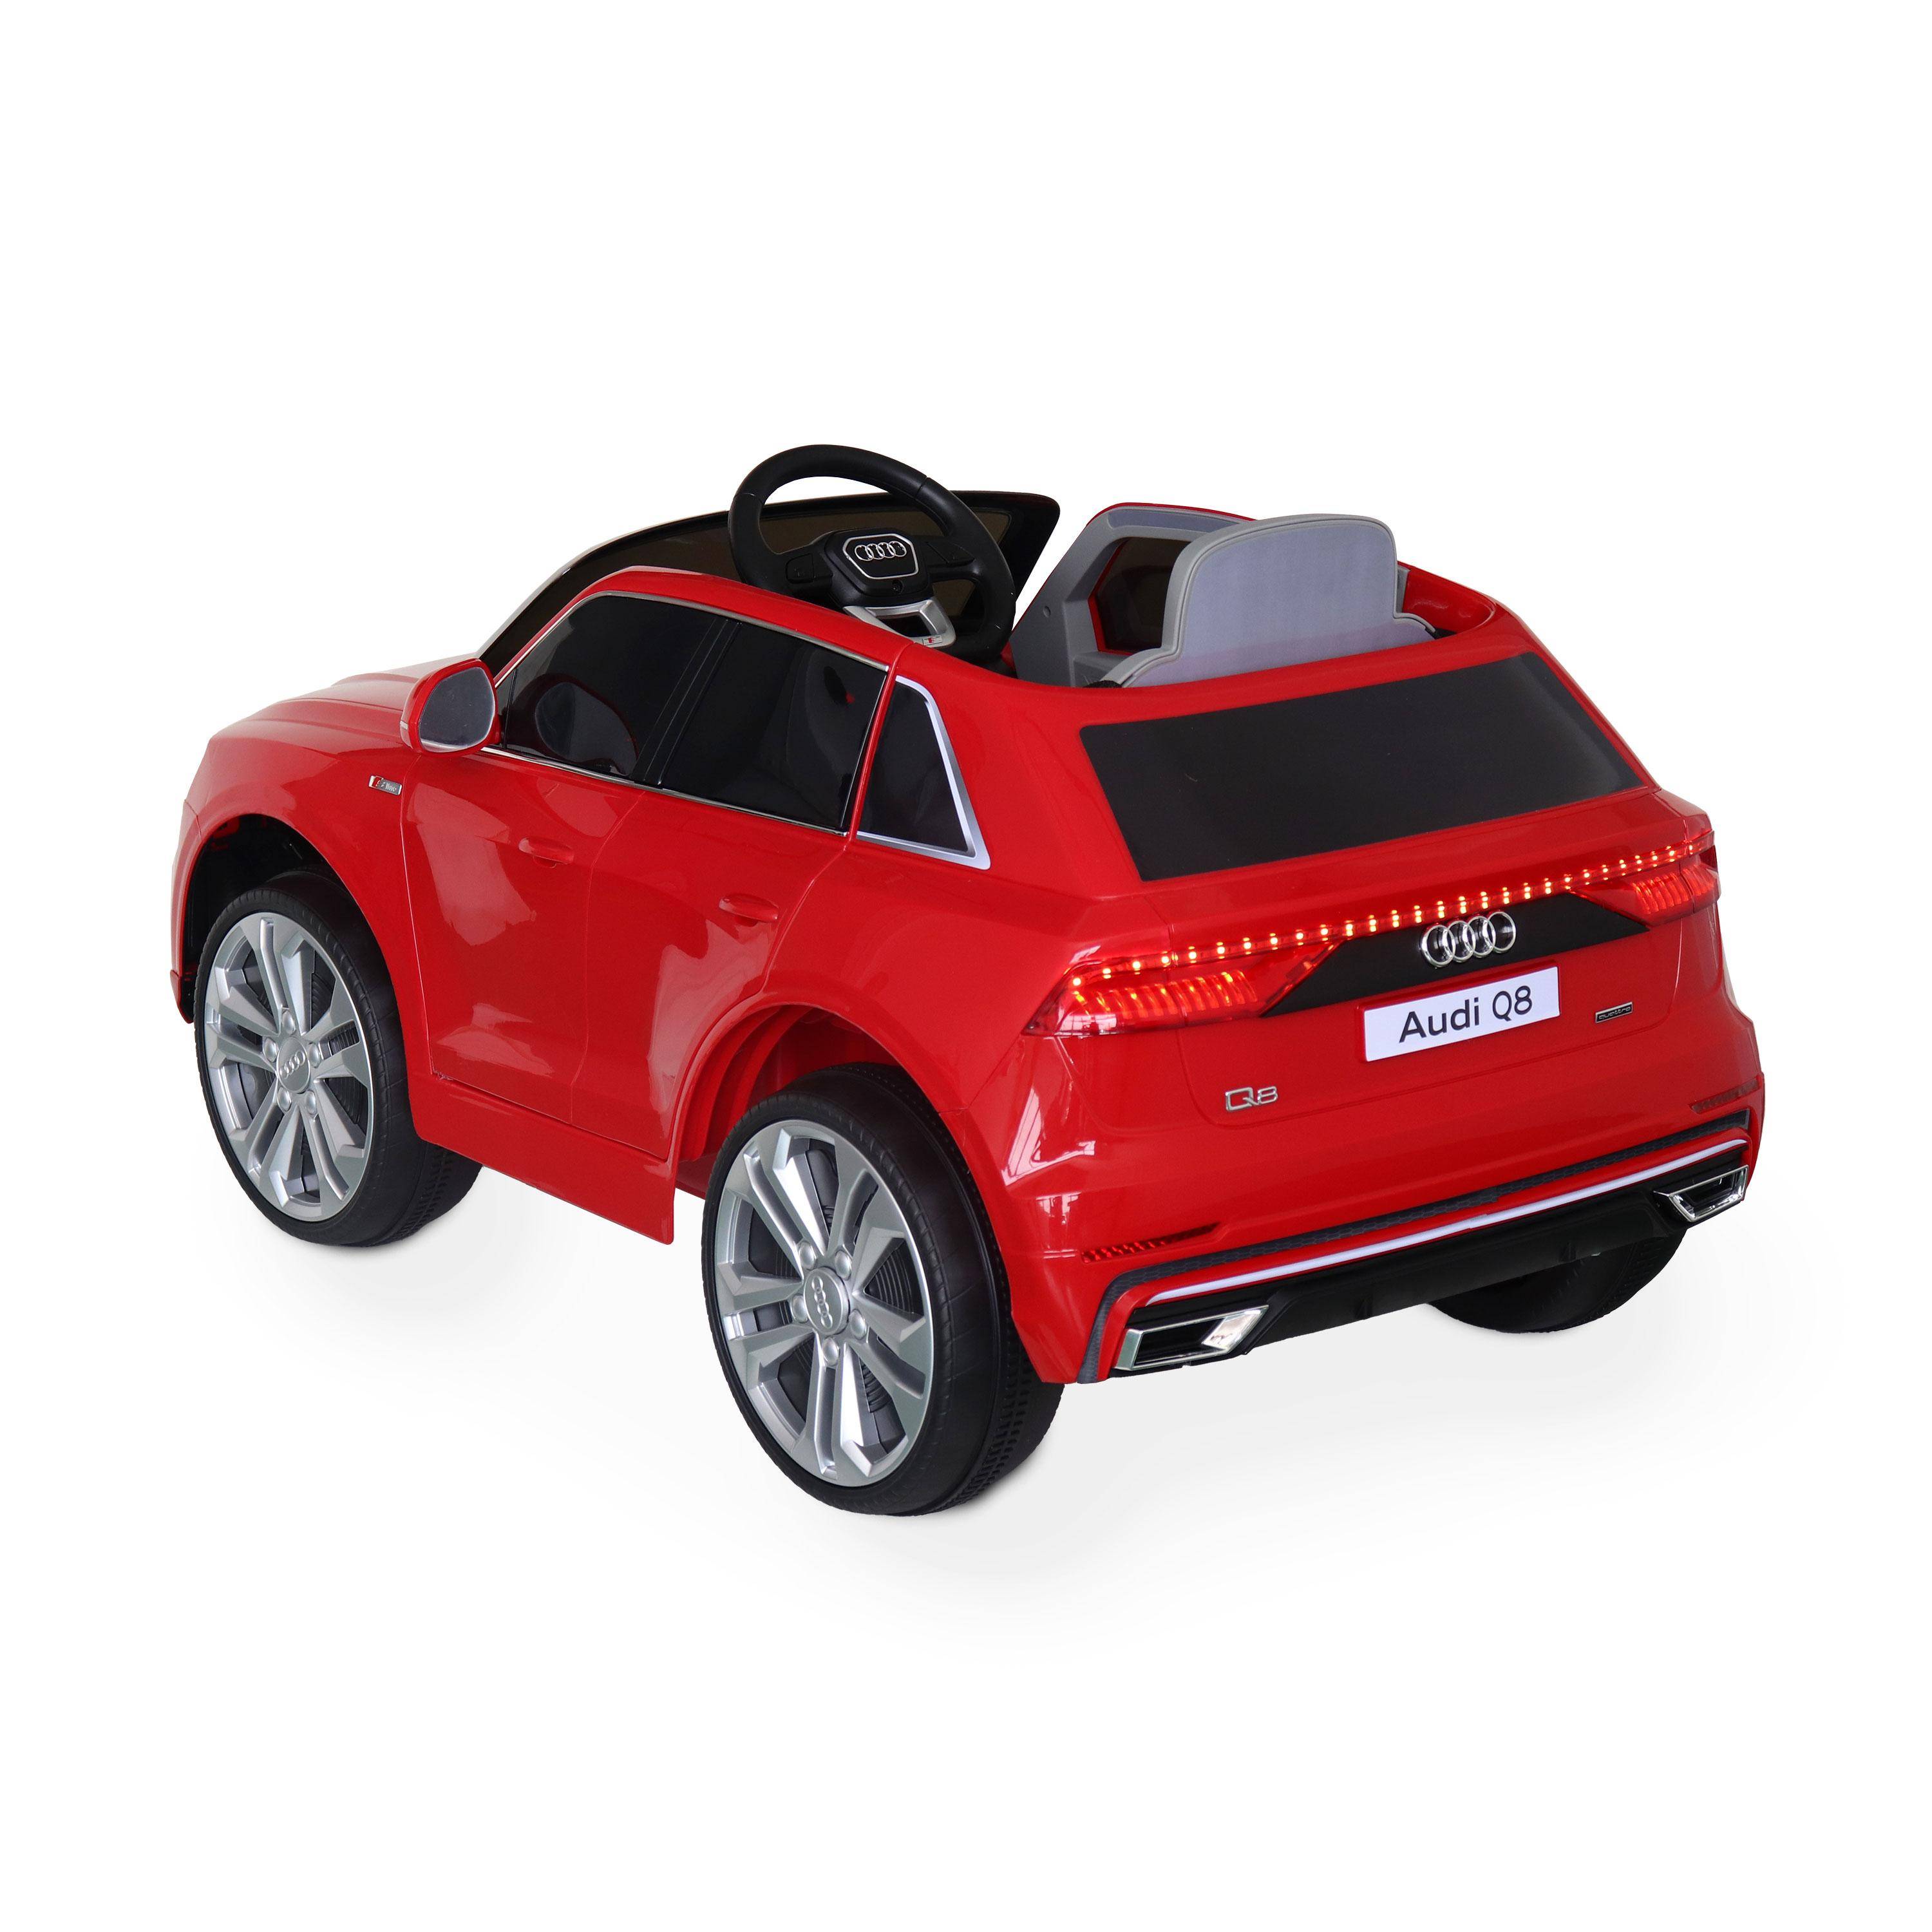 Children's electric car 12V, 1 seat with car radio and remote control - AUDI Q8 - Red,sweeek,Photo3